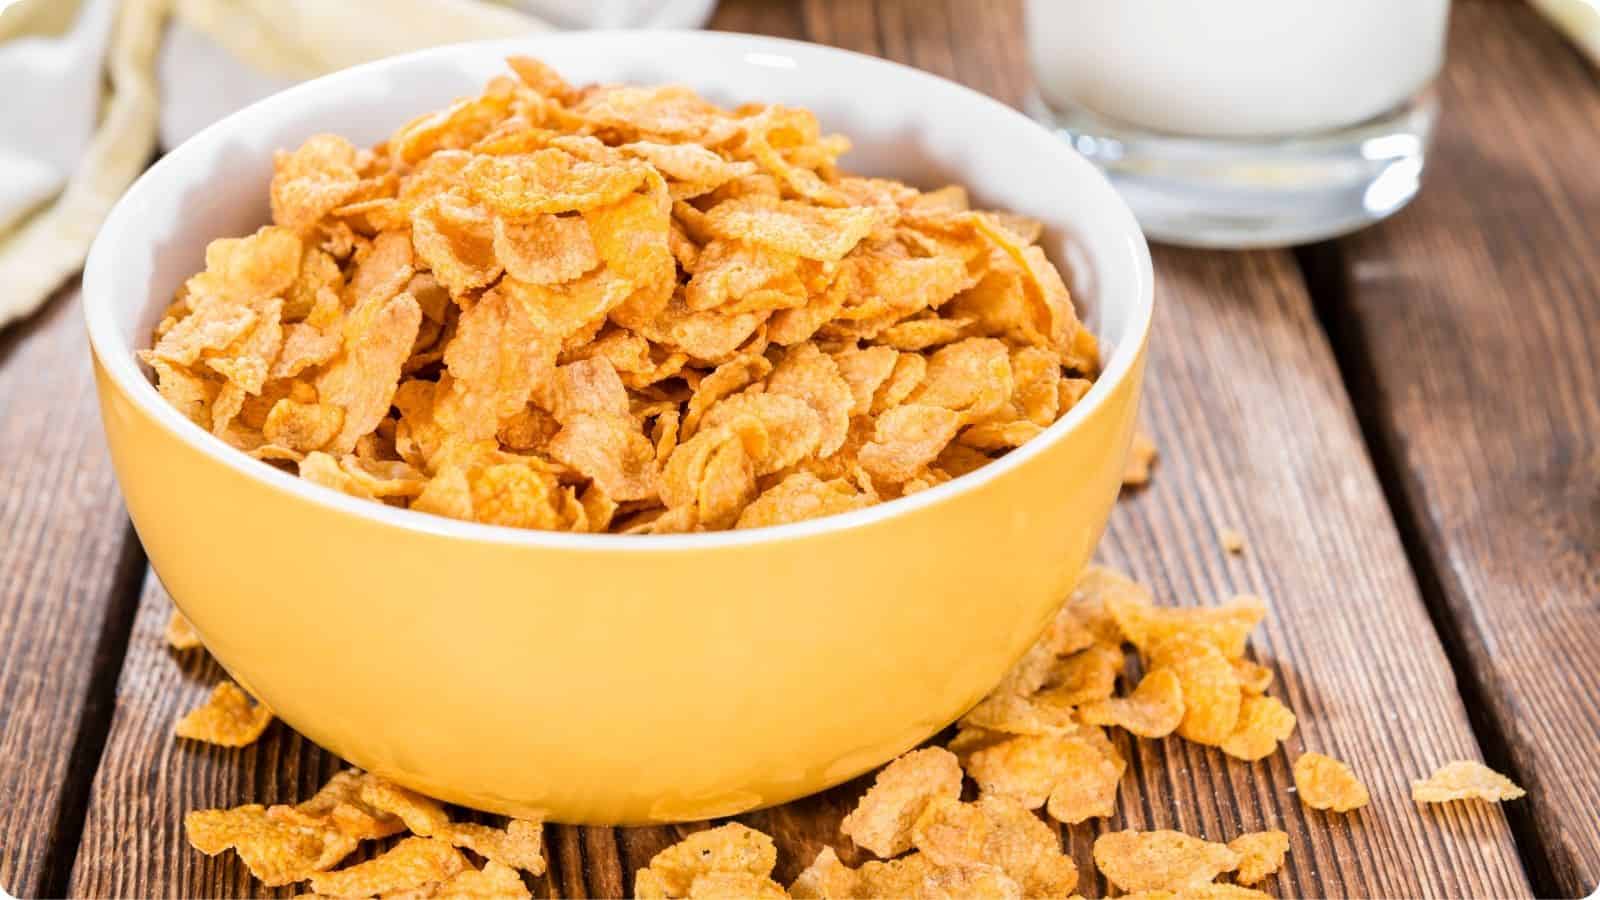 Cornflakes in a yellow bowl serve on a wooden table.